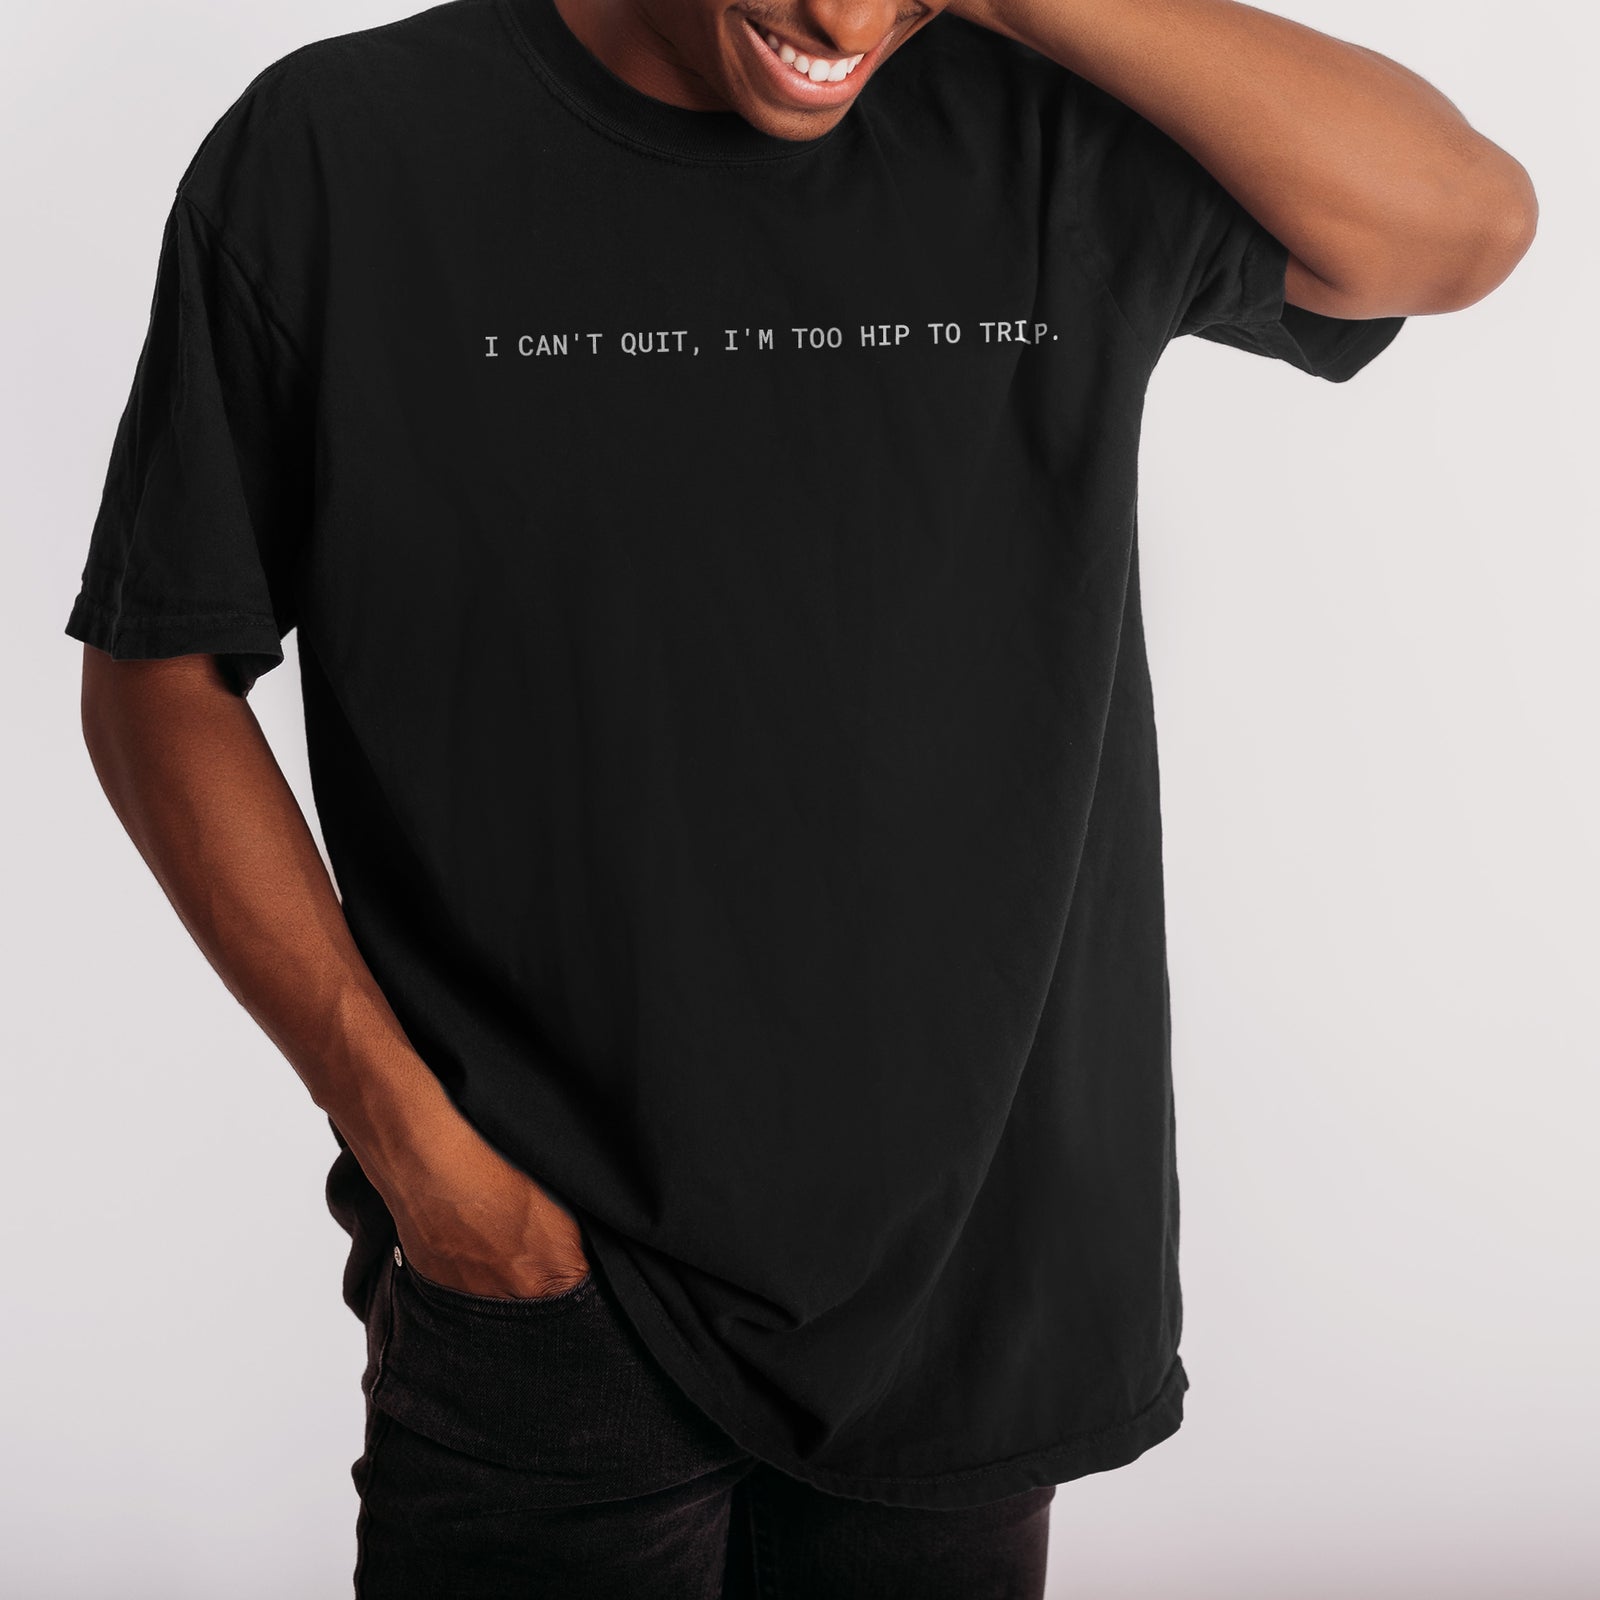 I Can't Quit, I'm Too Hip to Trip Boyfriend Crew Tee Solid Black Closeup Artwork and Texture